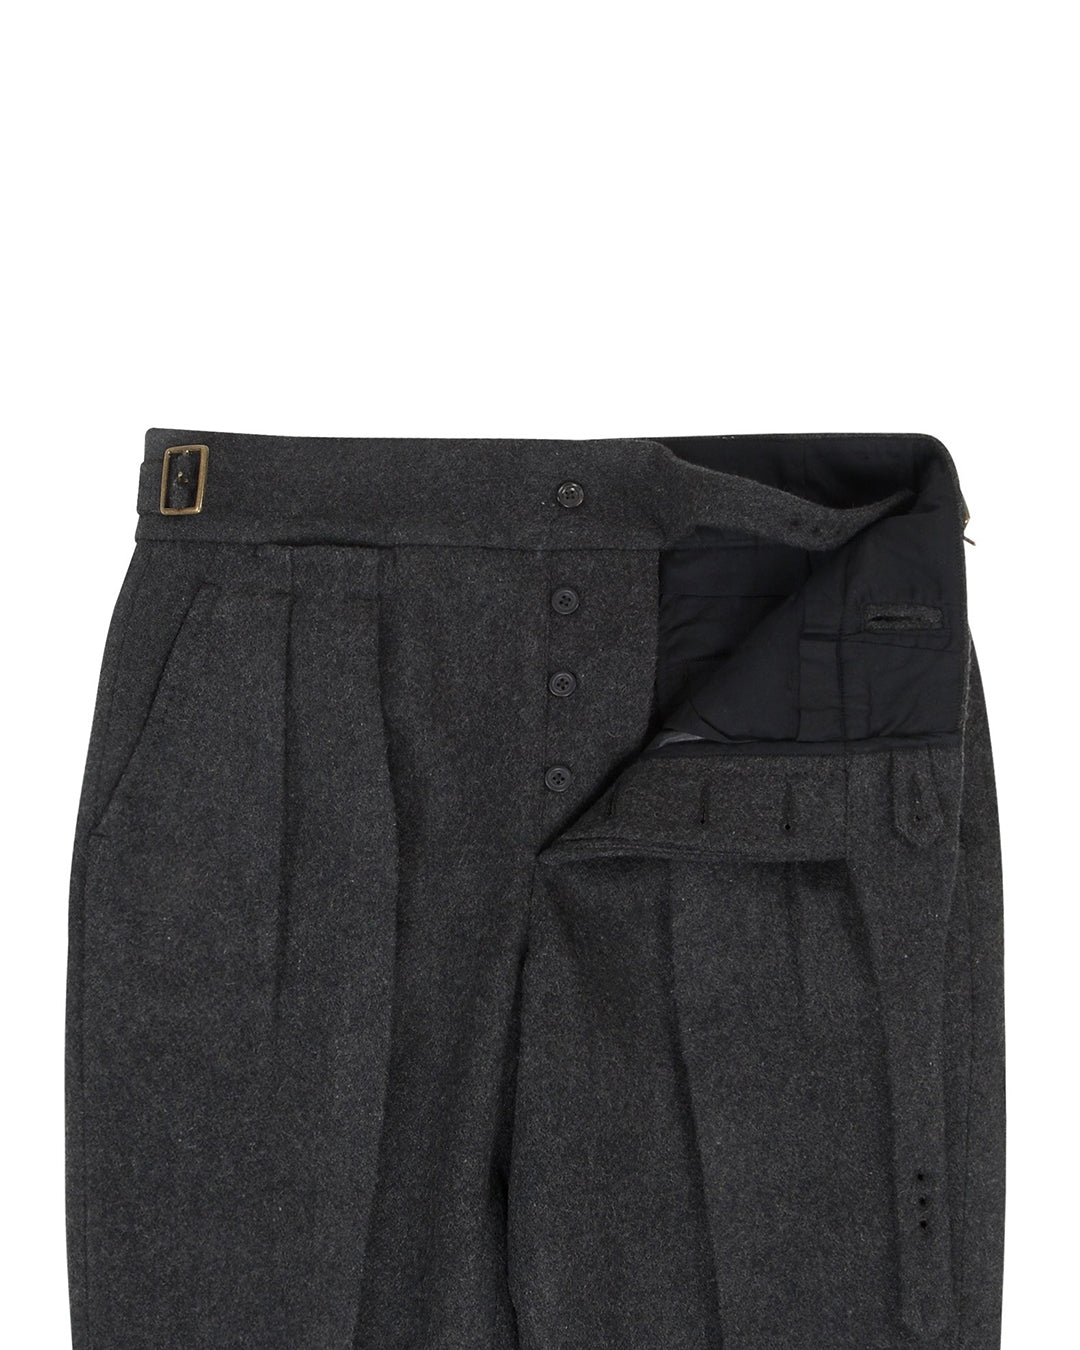 Front open view of the Gurkha Pant in Charcoal Grey Wool